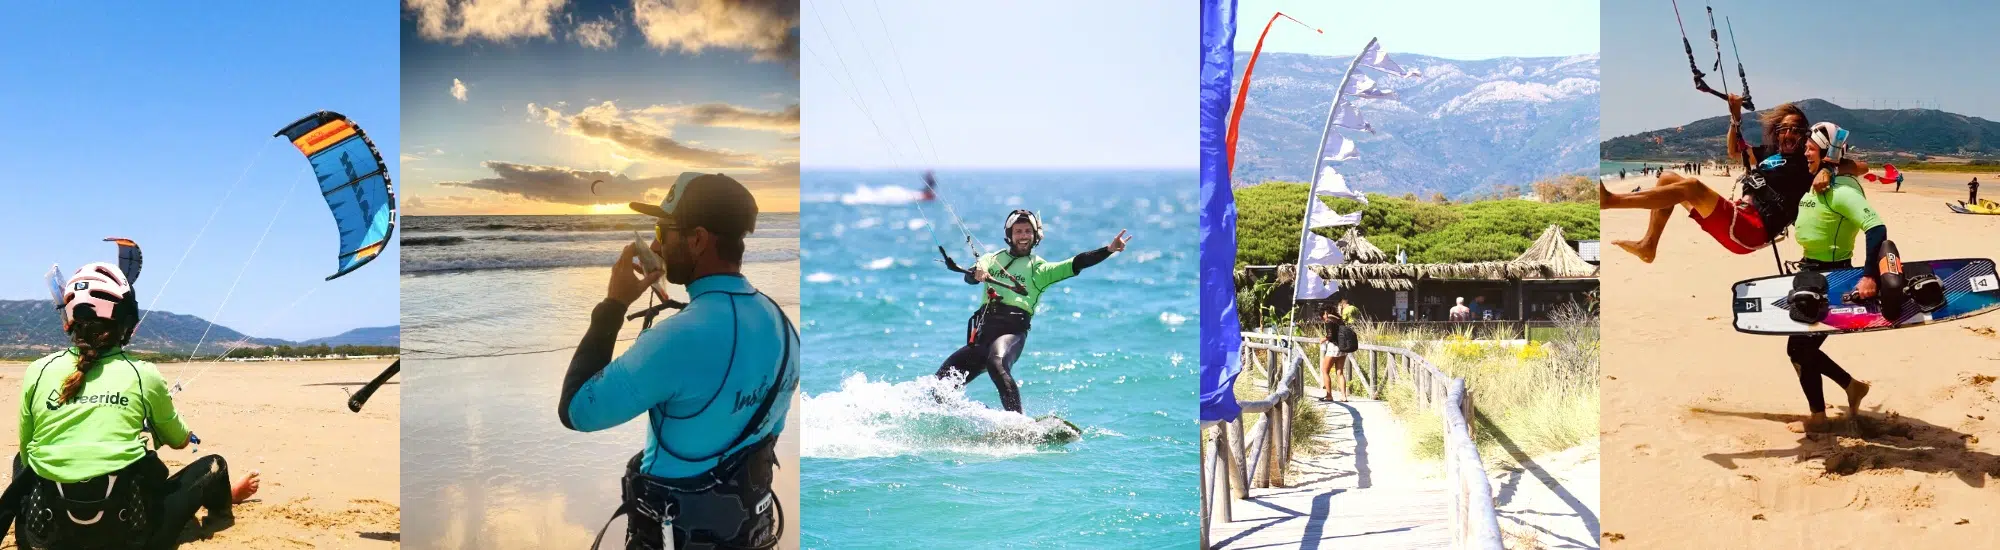 Kitesurfing Lessons in Tarifa, kite courses tailored in english, german and other languages